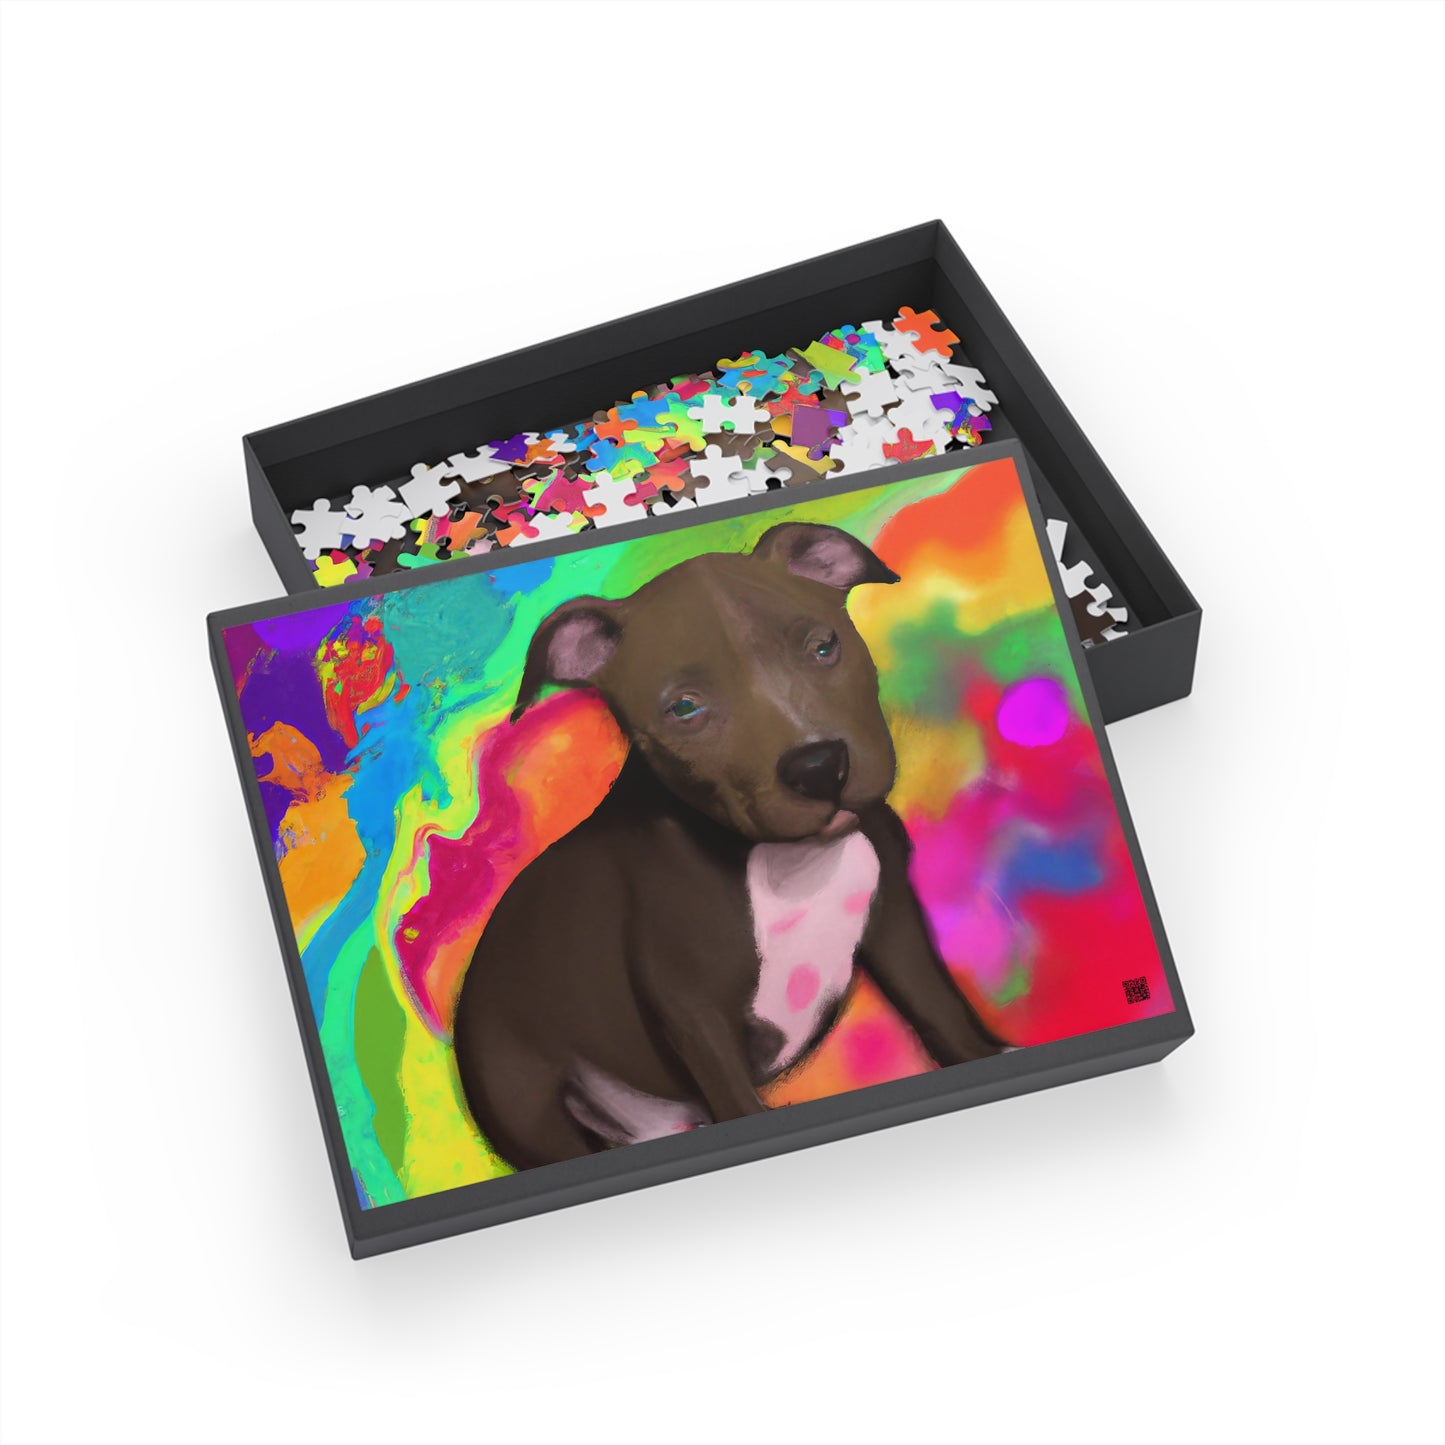 Augustus Royalty - Pitbull Puppy - Puzzle